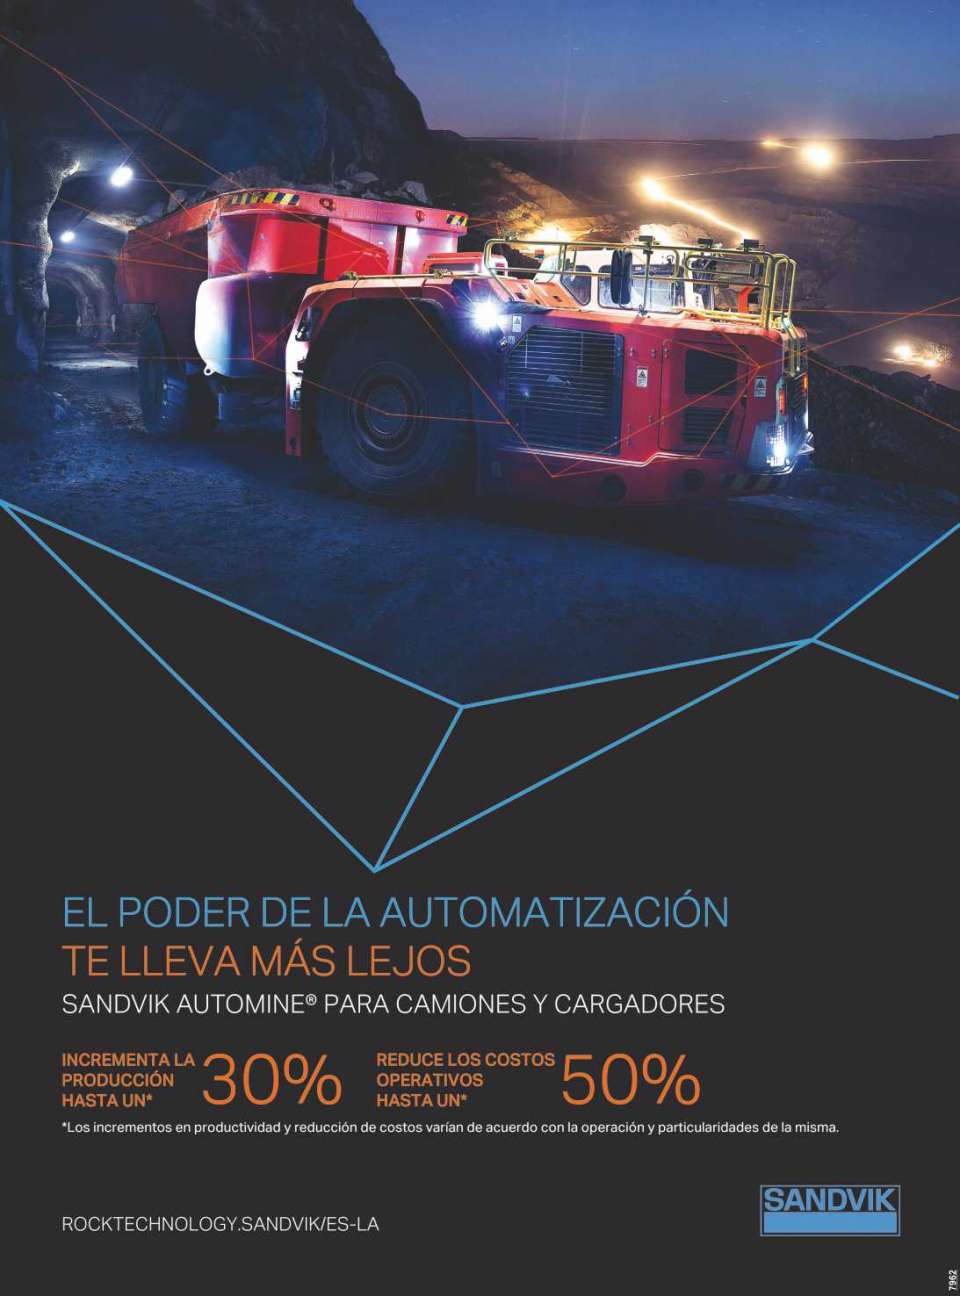 The power of Automation takes you further. SANDVIK AUTOMINE for Trucks and Loaders, increases production up to 30% and reduces operating costs up to 50%